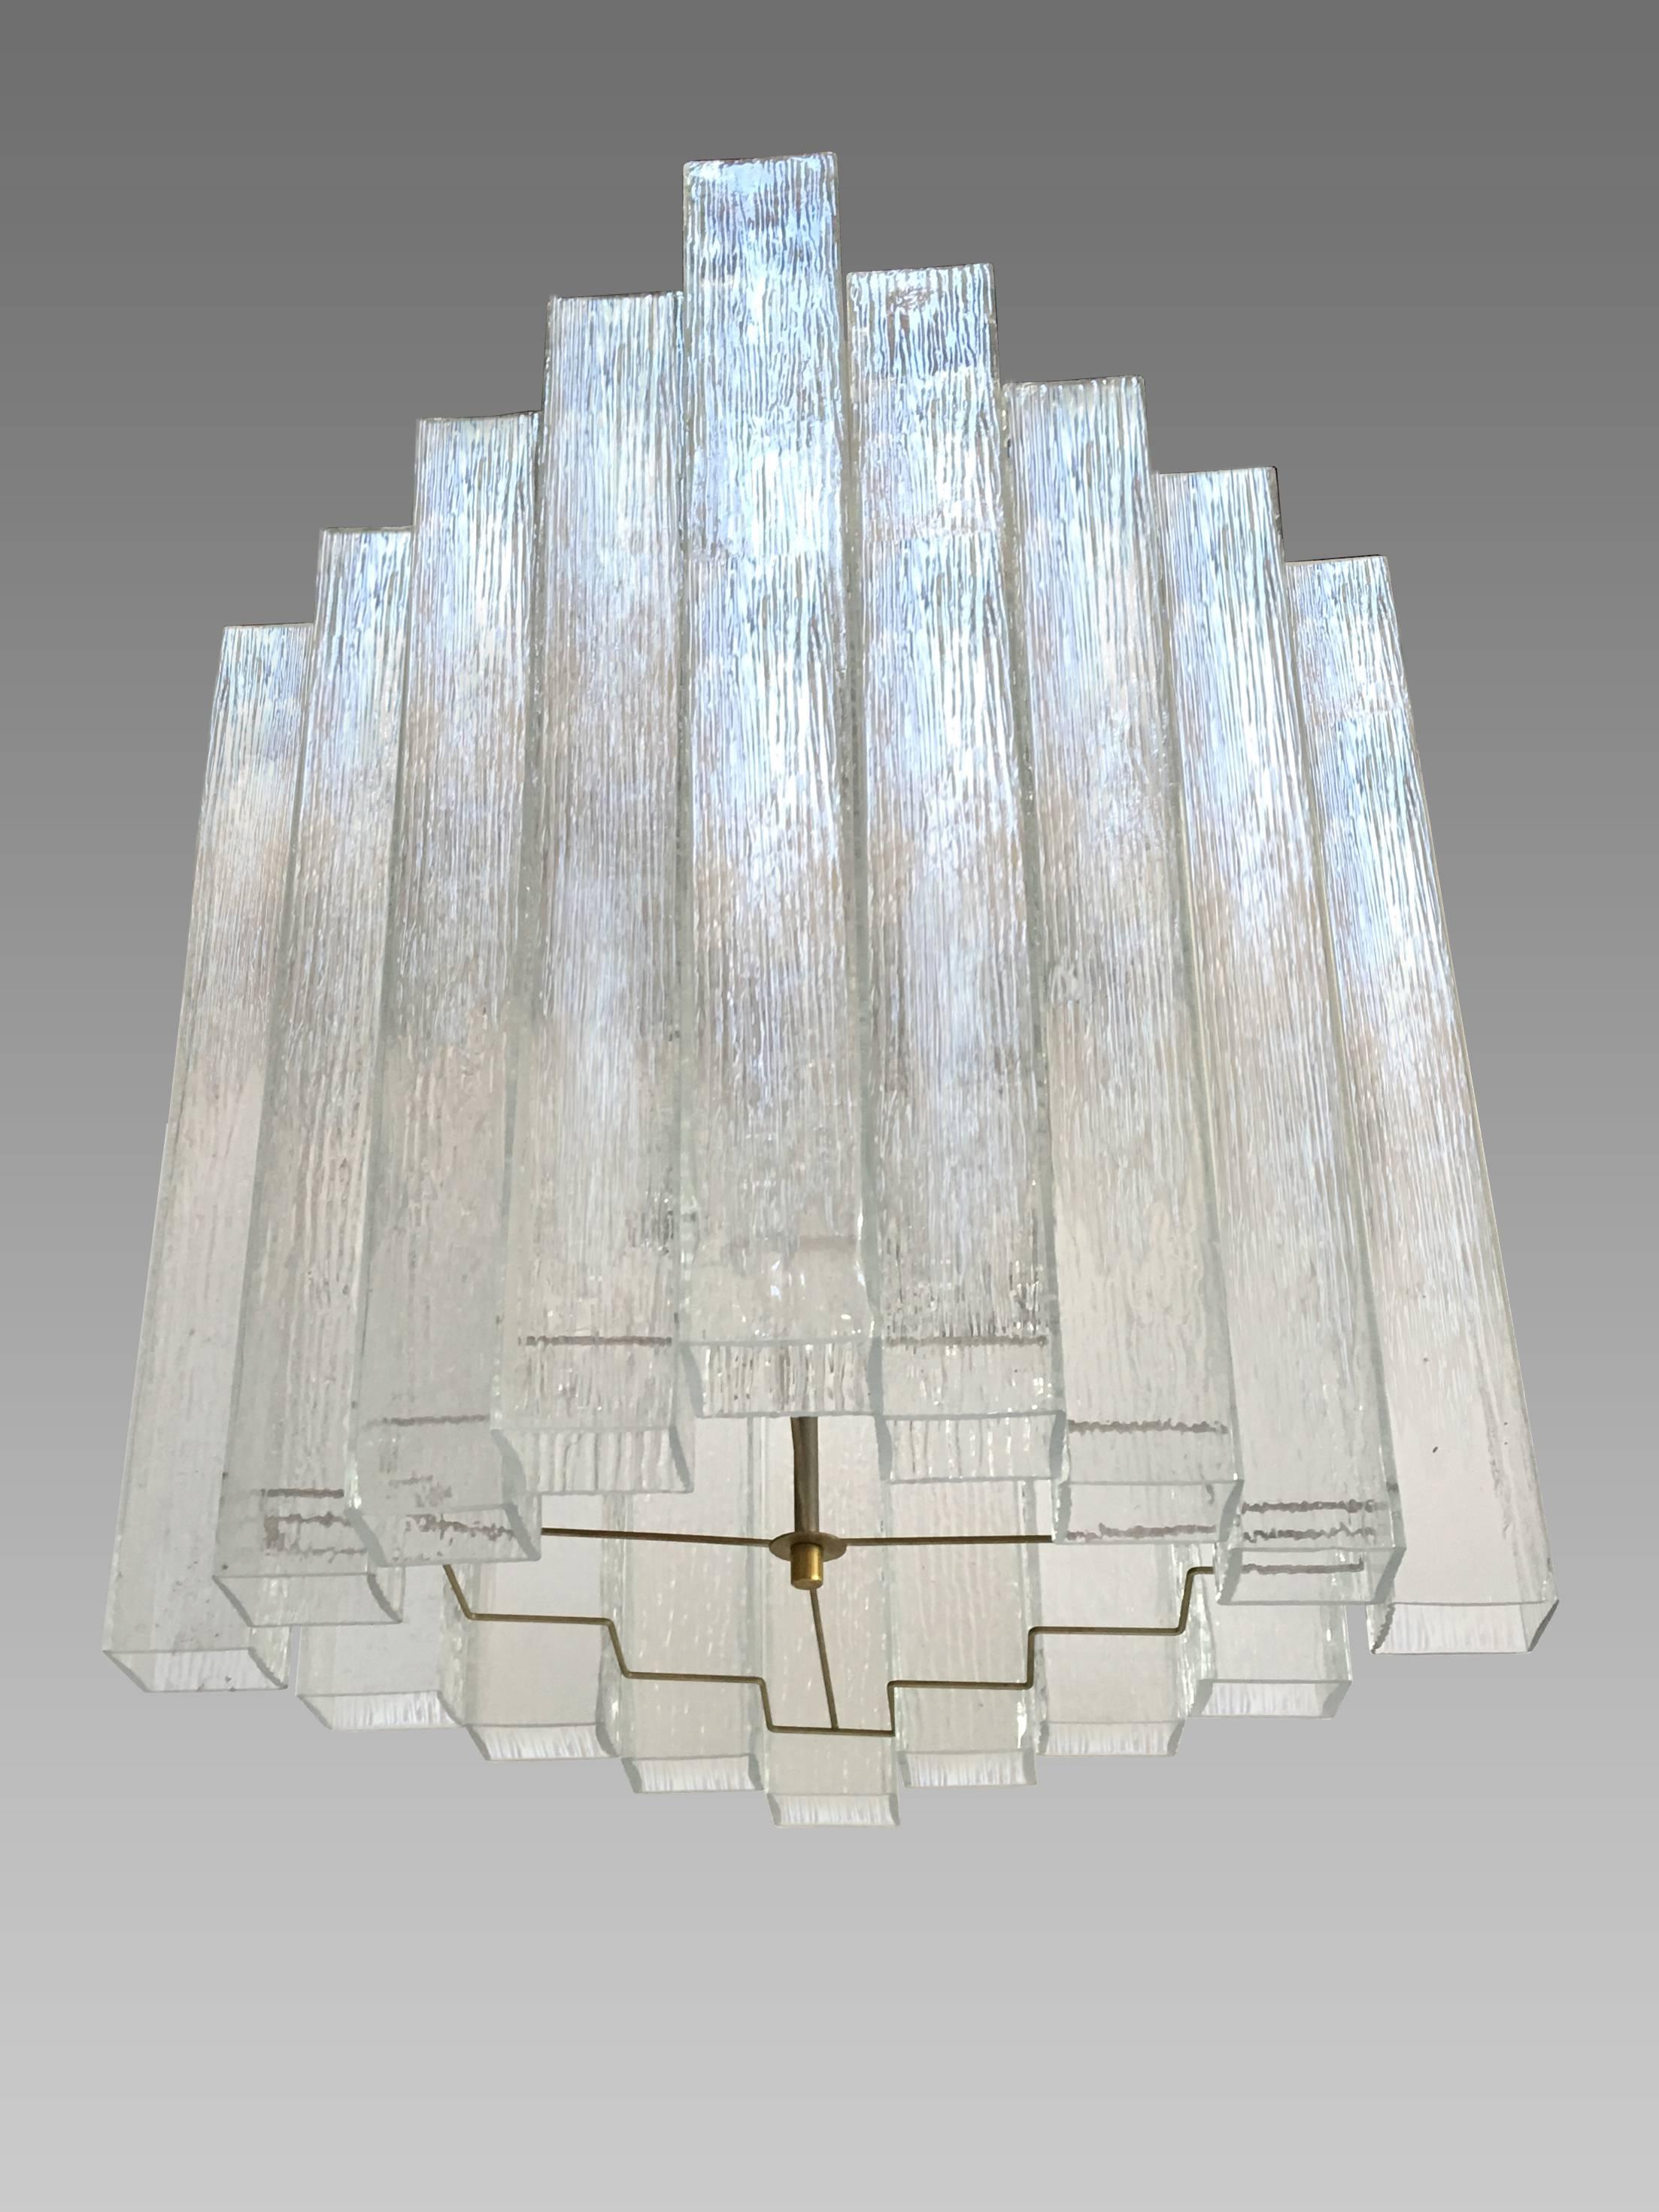 German Textural Glass Chandelier by Doria In Excellent Condition For Sale In New York, NY